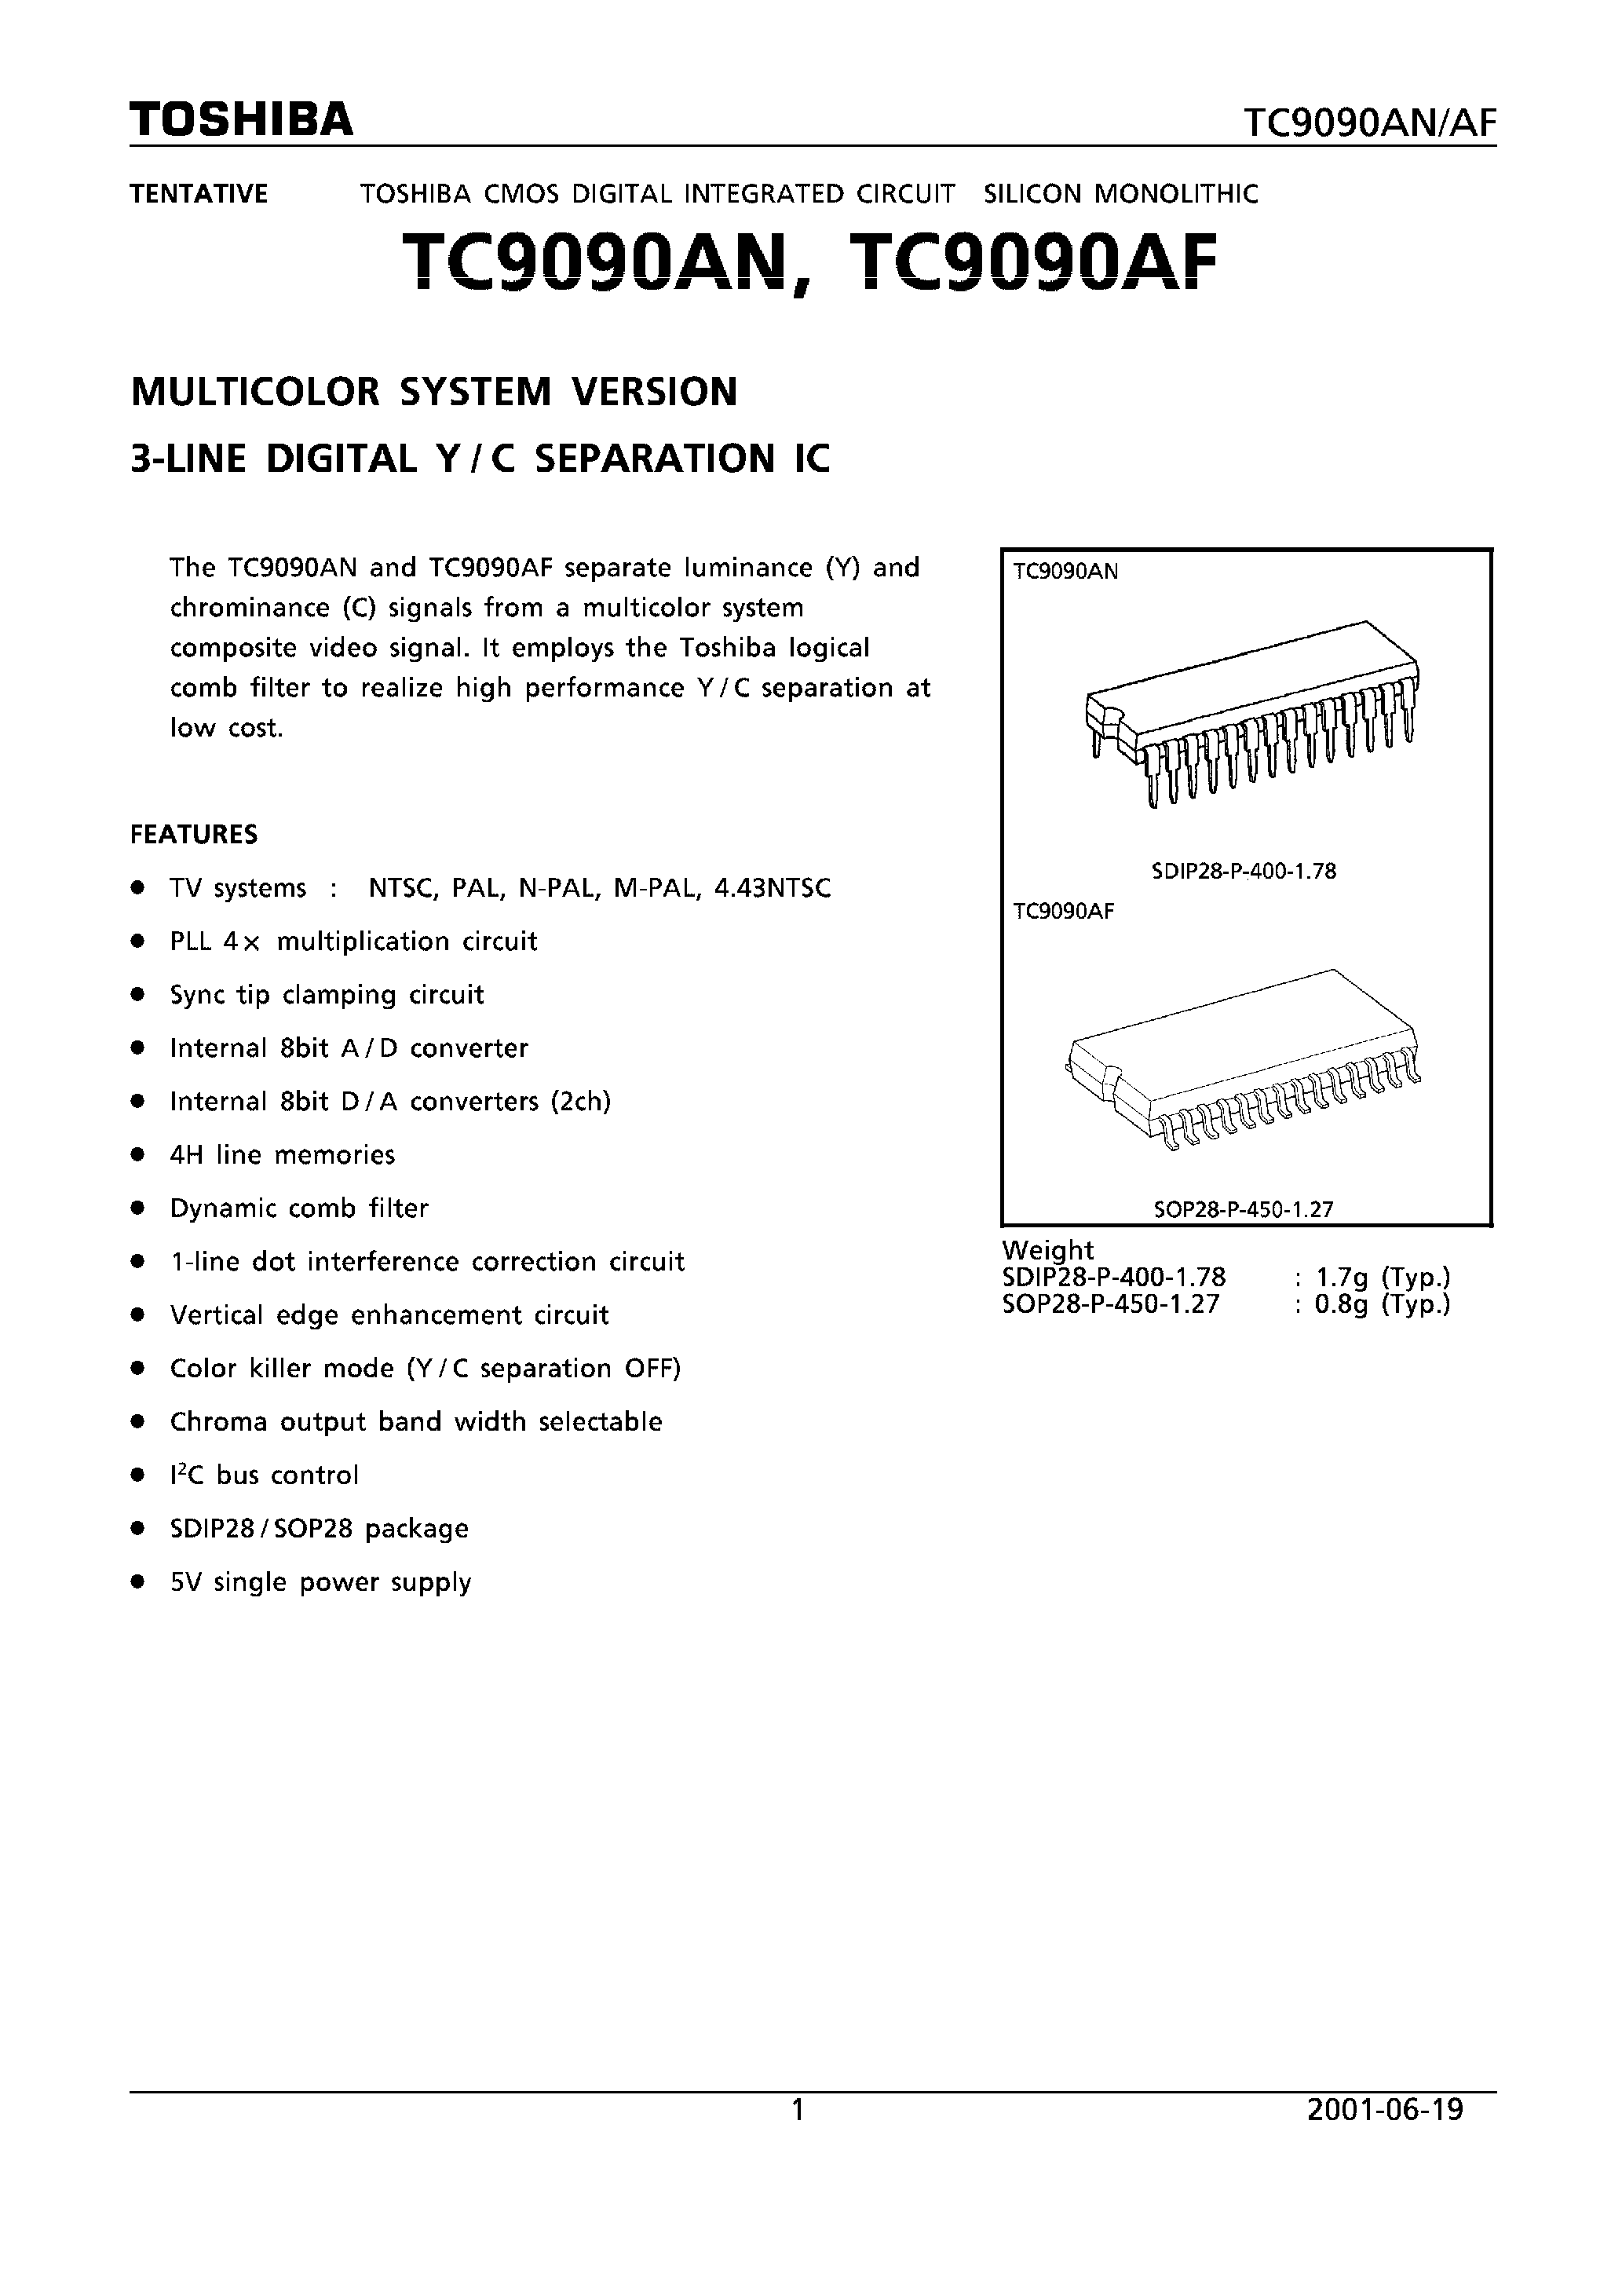 Datasheet TC9090AN - MULTICOLOR SYSTEM VERSION 3 LINE DIGITAL Y/C SEPARATION IC page 1